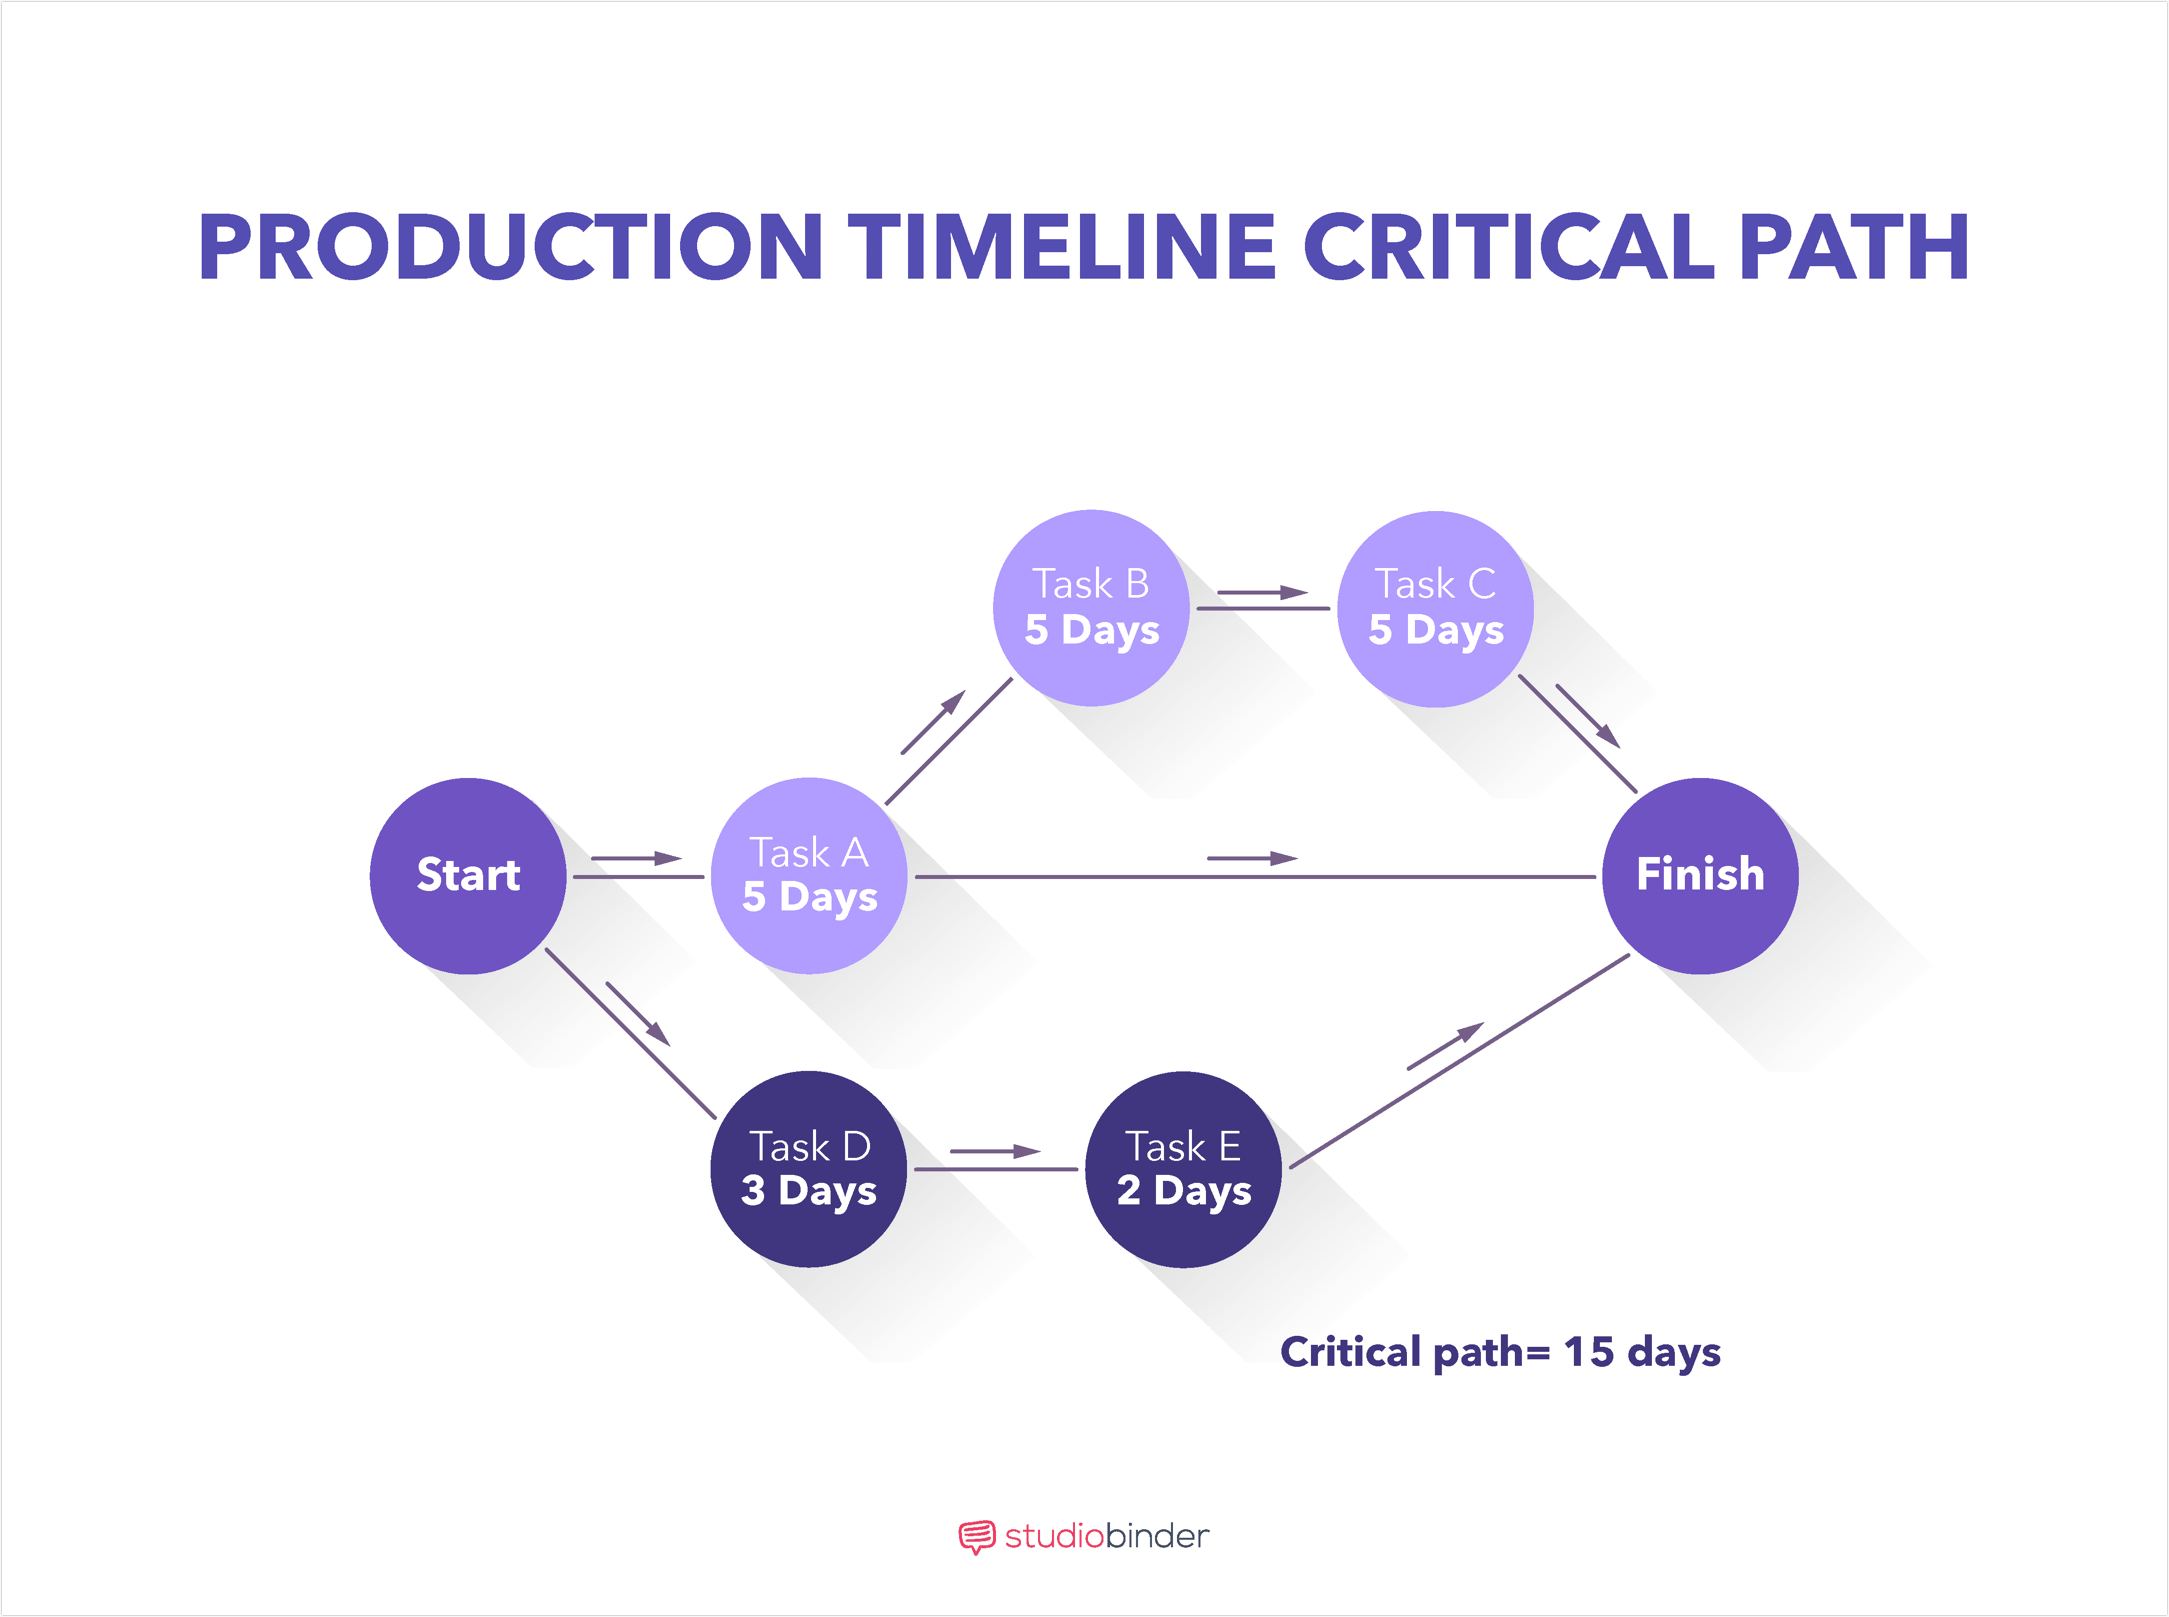 Film, Photo, & Video Production Timeline - The Critical Path - StudioBinder